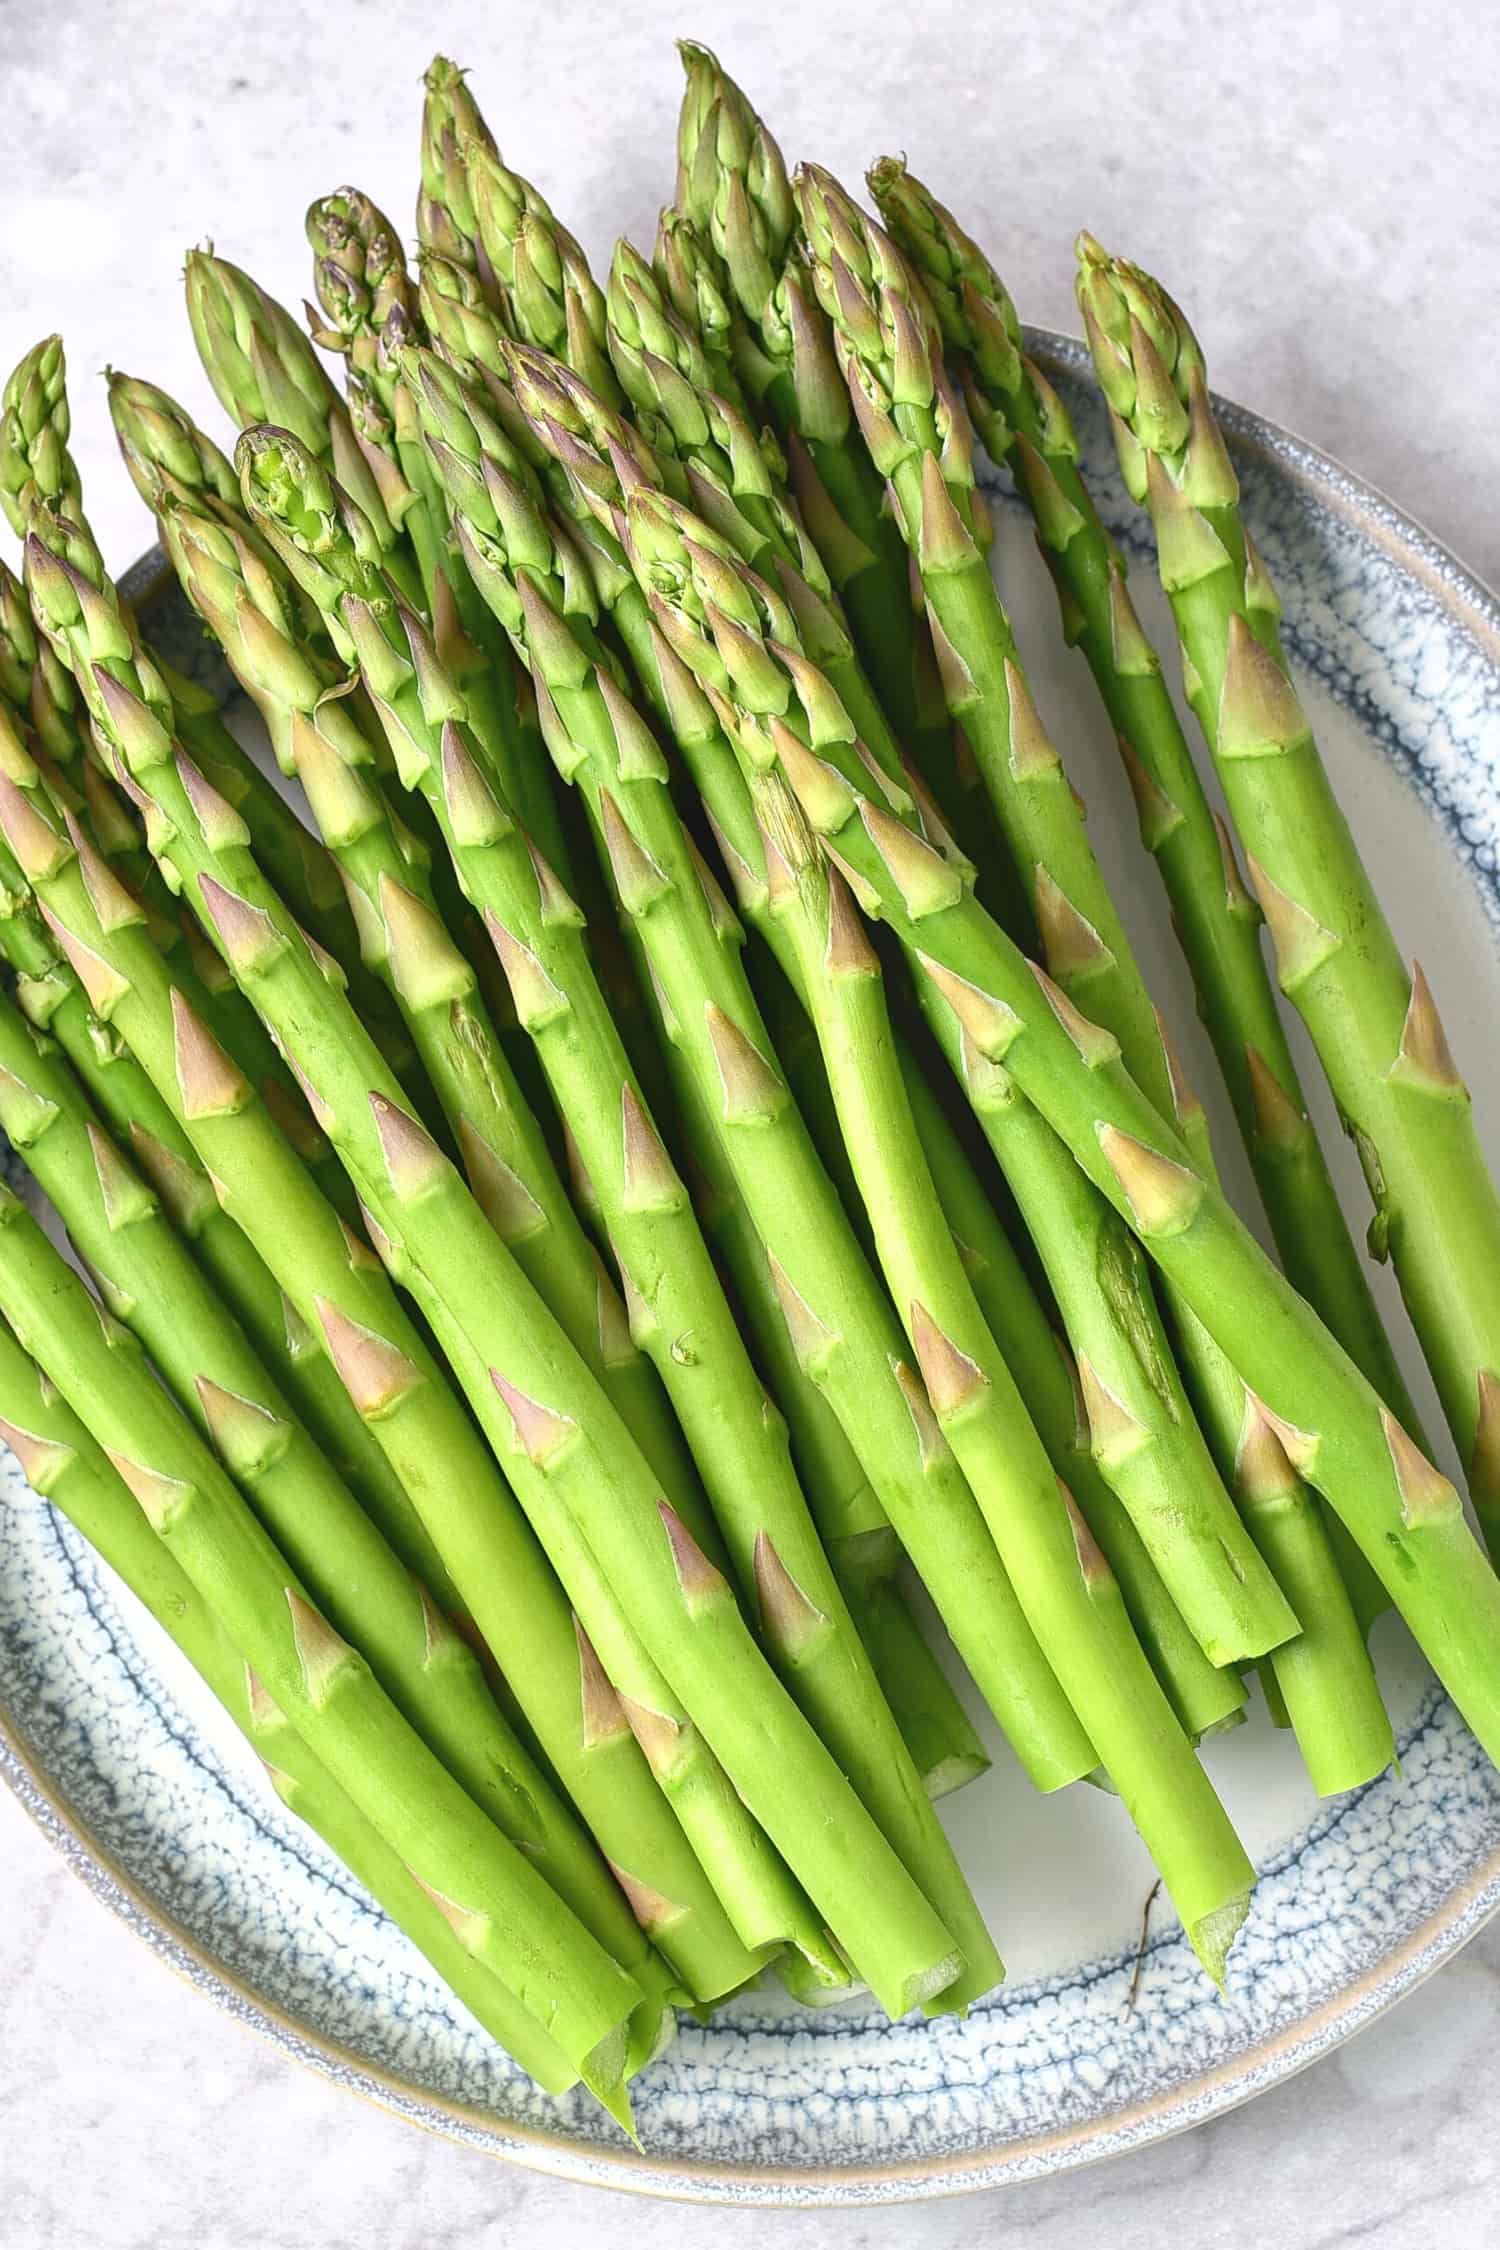 Uncooked asparagus spears on plate.